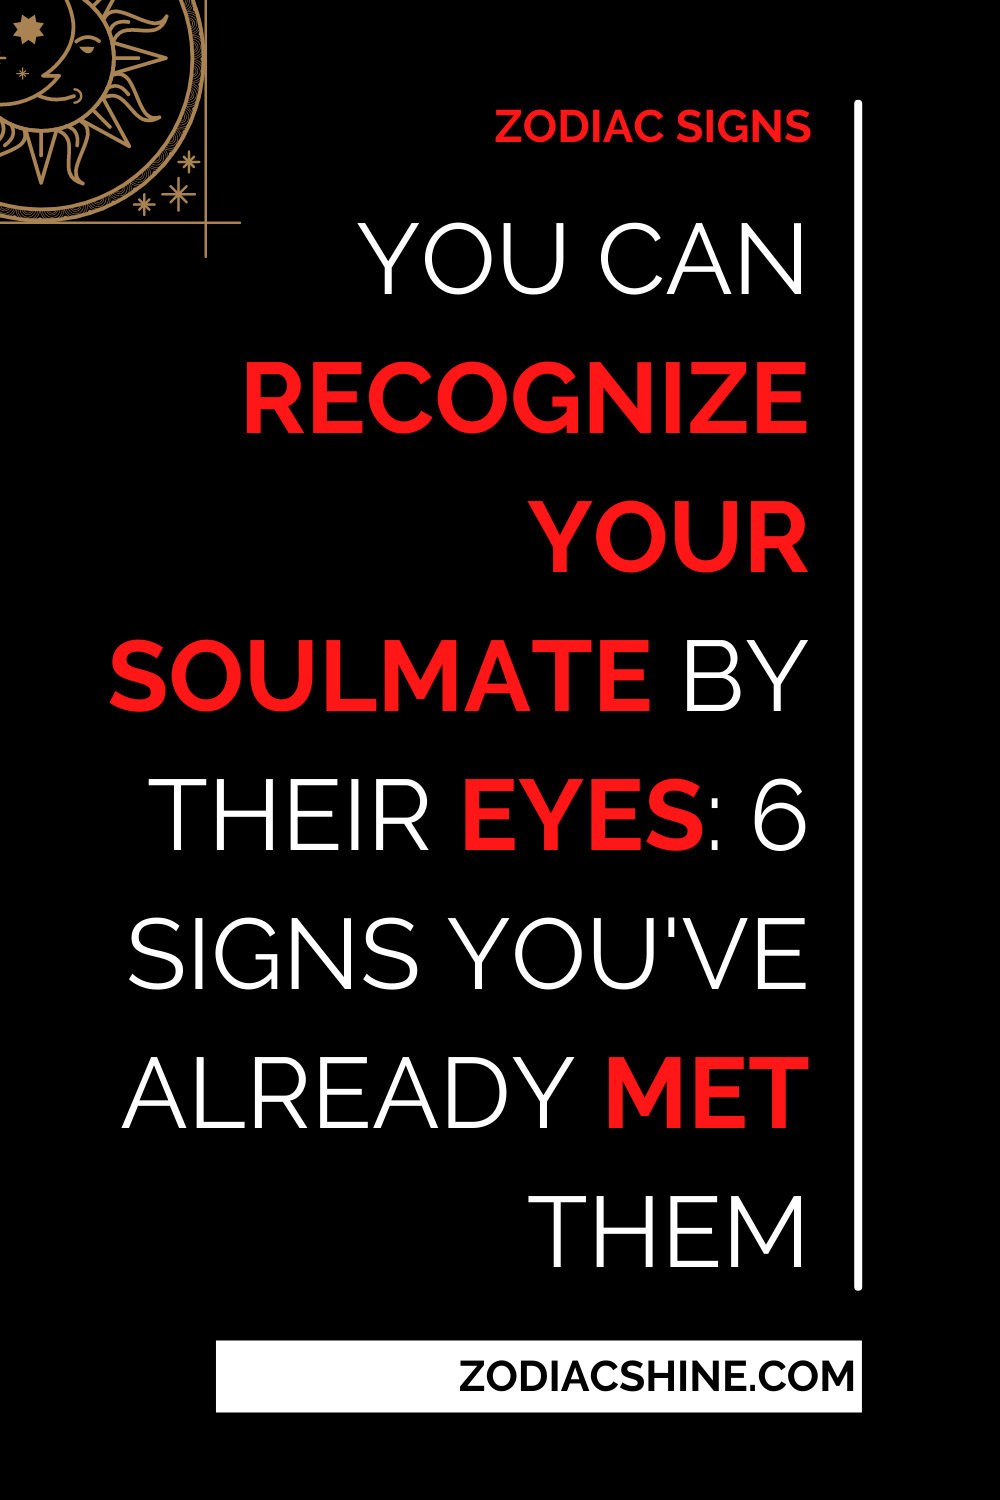 You Can Recognize Your Soulmate By Their Eyes: 6 Signs You've Already Met Them